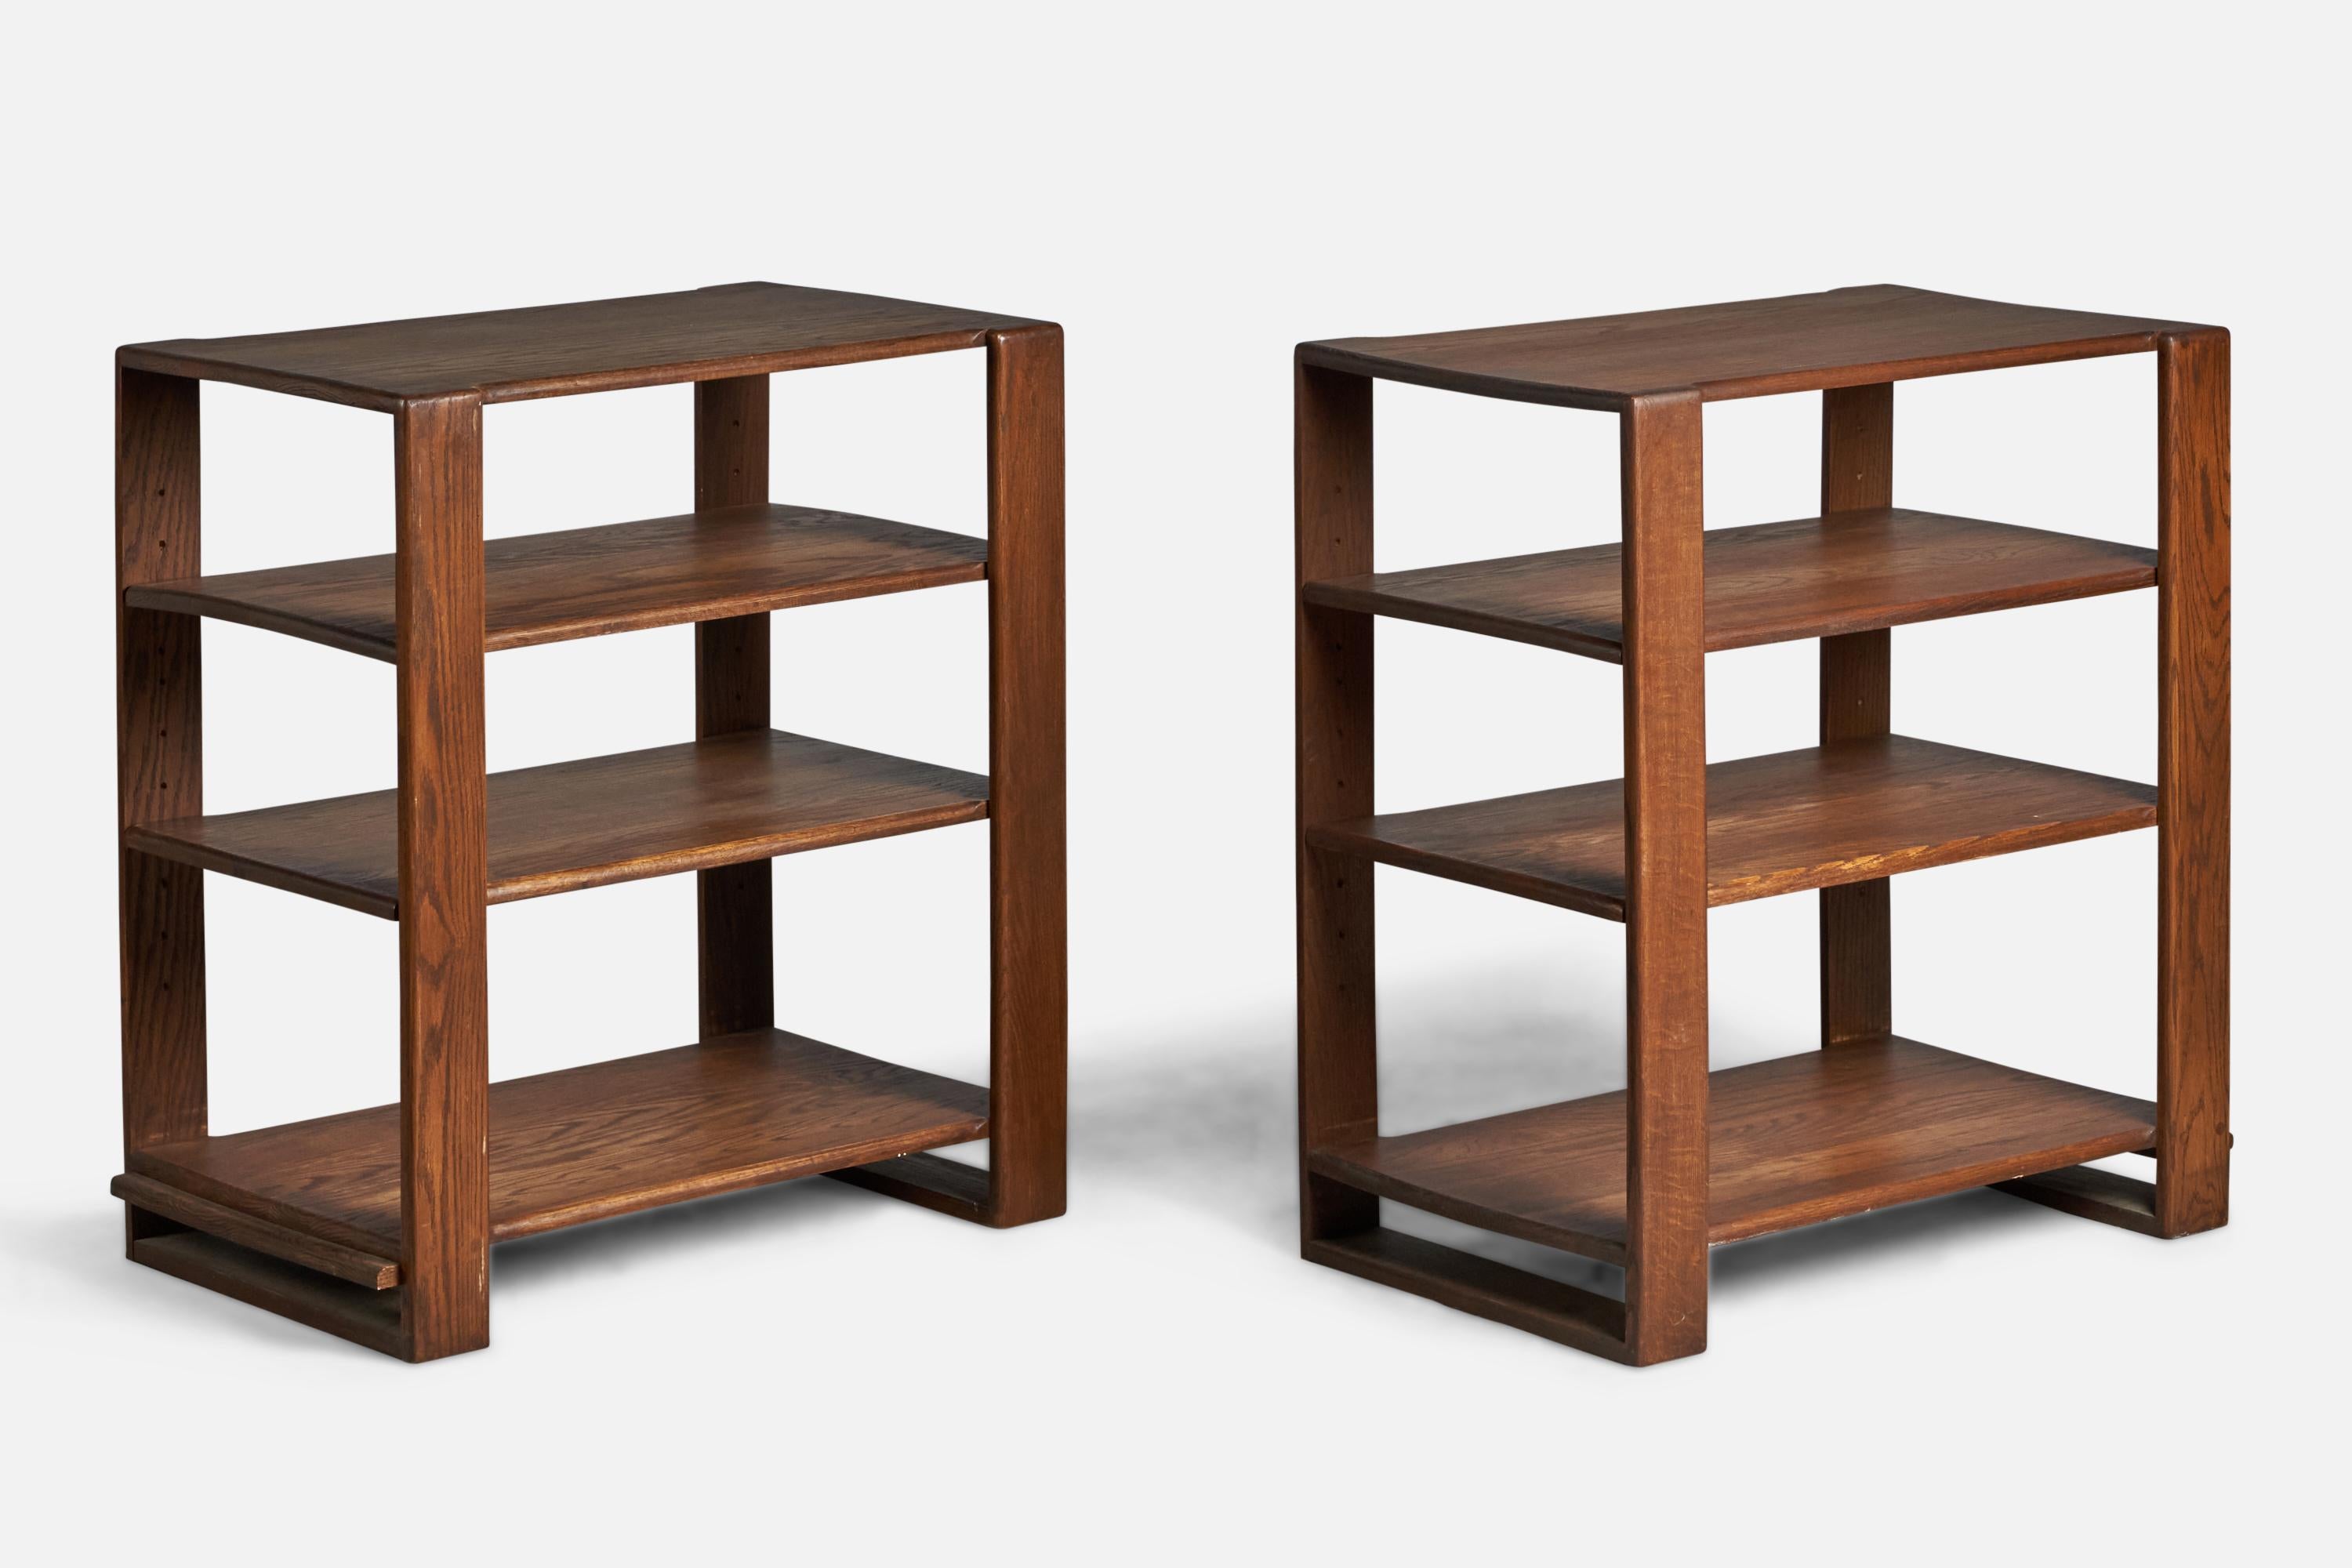 A pair of oak side or nightstands or etageres, designed and produced in the US, c. 1950s. With adjustable shelves.